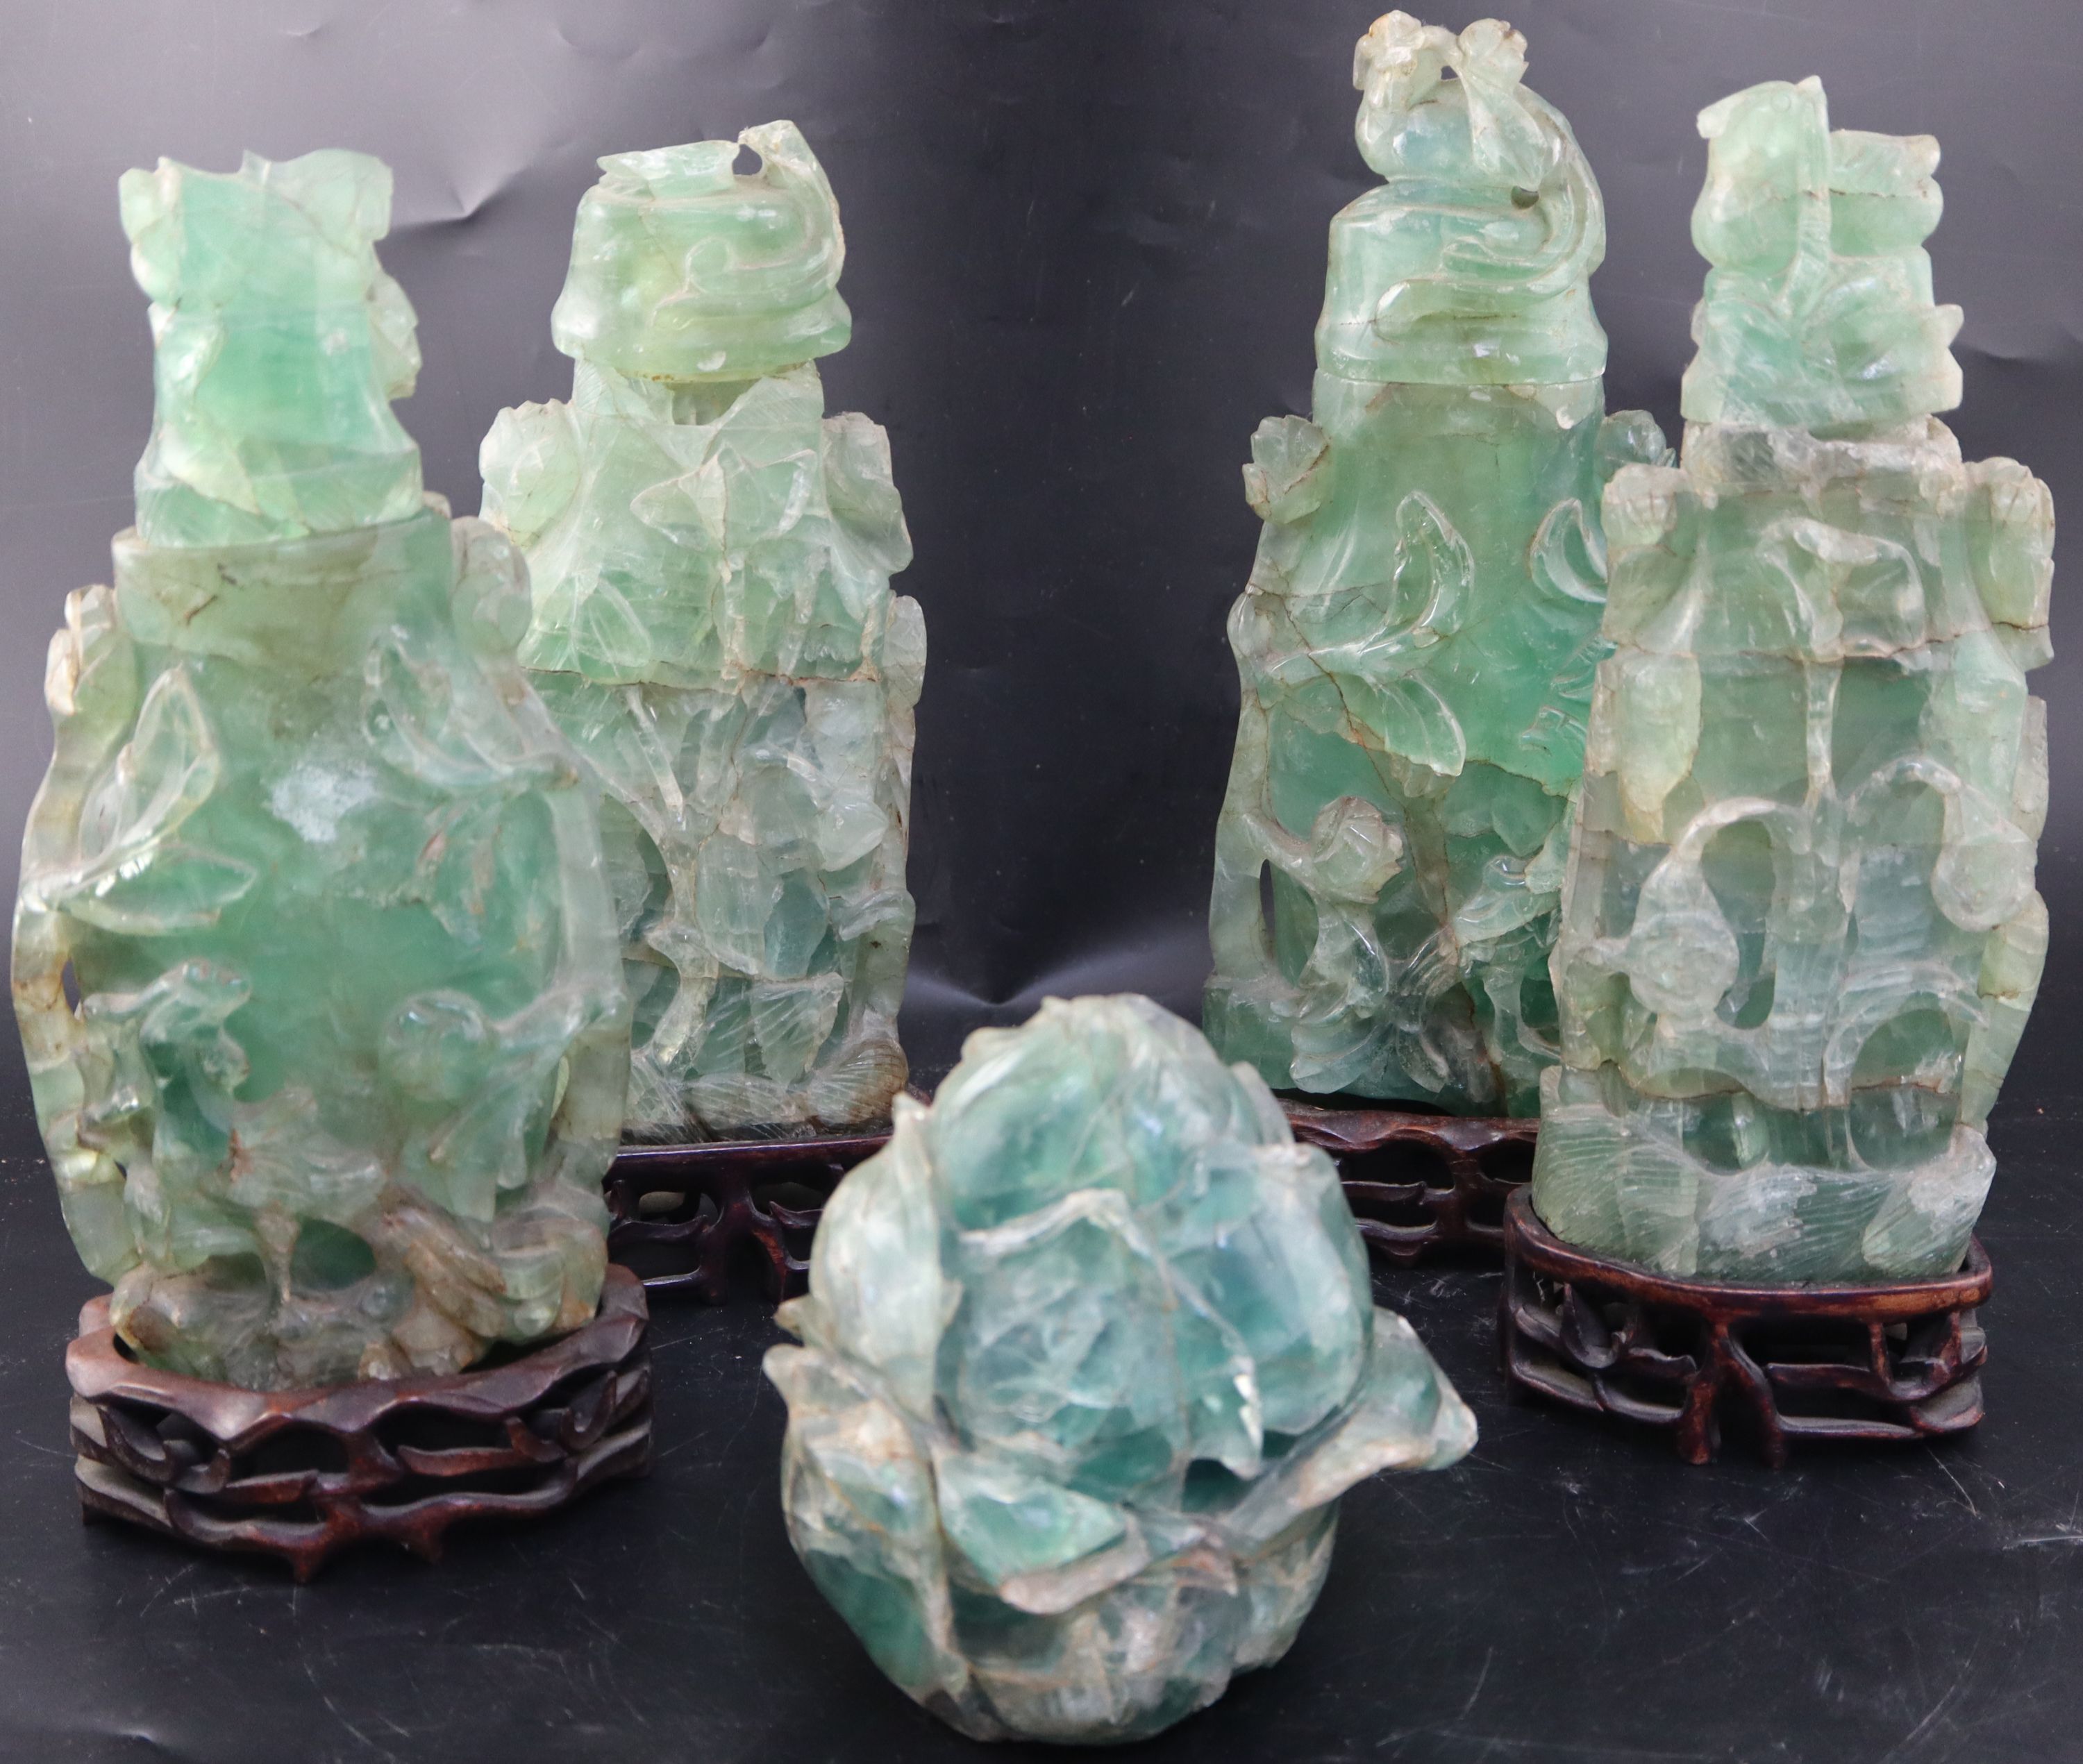 Four late 19th / early 20th century Chinese green quartz vases and covers, largest 27.5cm